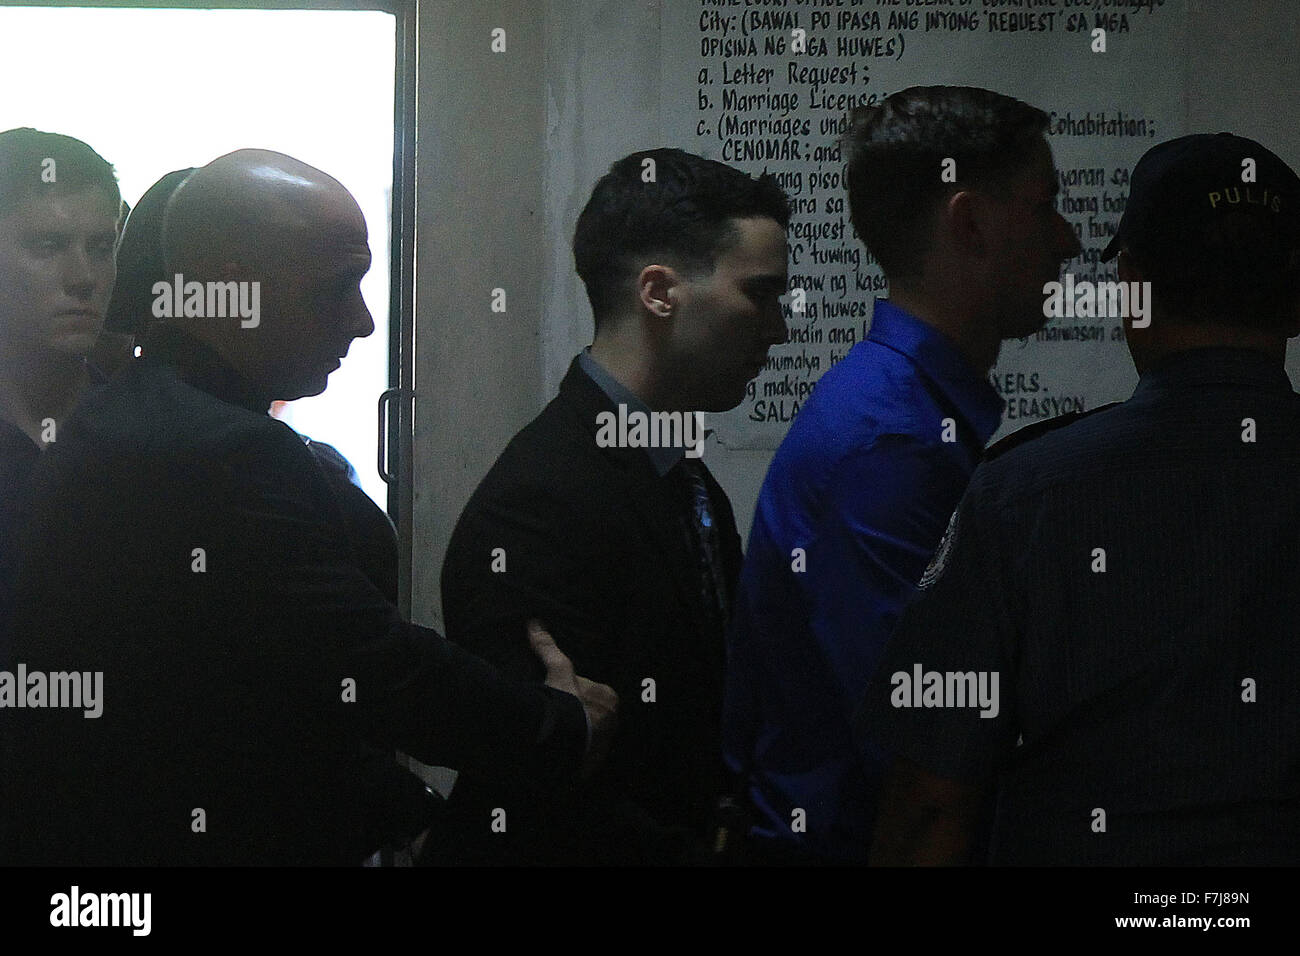 Olongapo City, Philippines. 1st Dec, 2015. U.S. Marine Lance Corporal Joseph Scott Pemberton (C) is escorted by security personnel before the verdict on a murder case at the Regional Trial Court in Olongapo City, the Philippines, Dec. 1, 2015. Pemberton is found guilty of homicide in the killing of Filipino transgender Jeffery 'Jennifer' Laude and will face a 6 to 12 years of imprisonment at the Armed Forces of the Philippines (AFP) Custodial Center. Credit:  Rouelle Umali/Xinhua/Alamy Live News Stock Photo